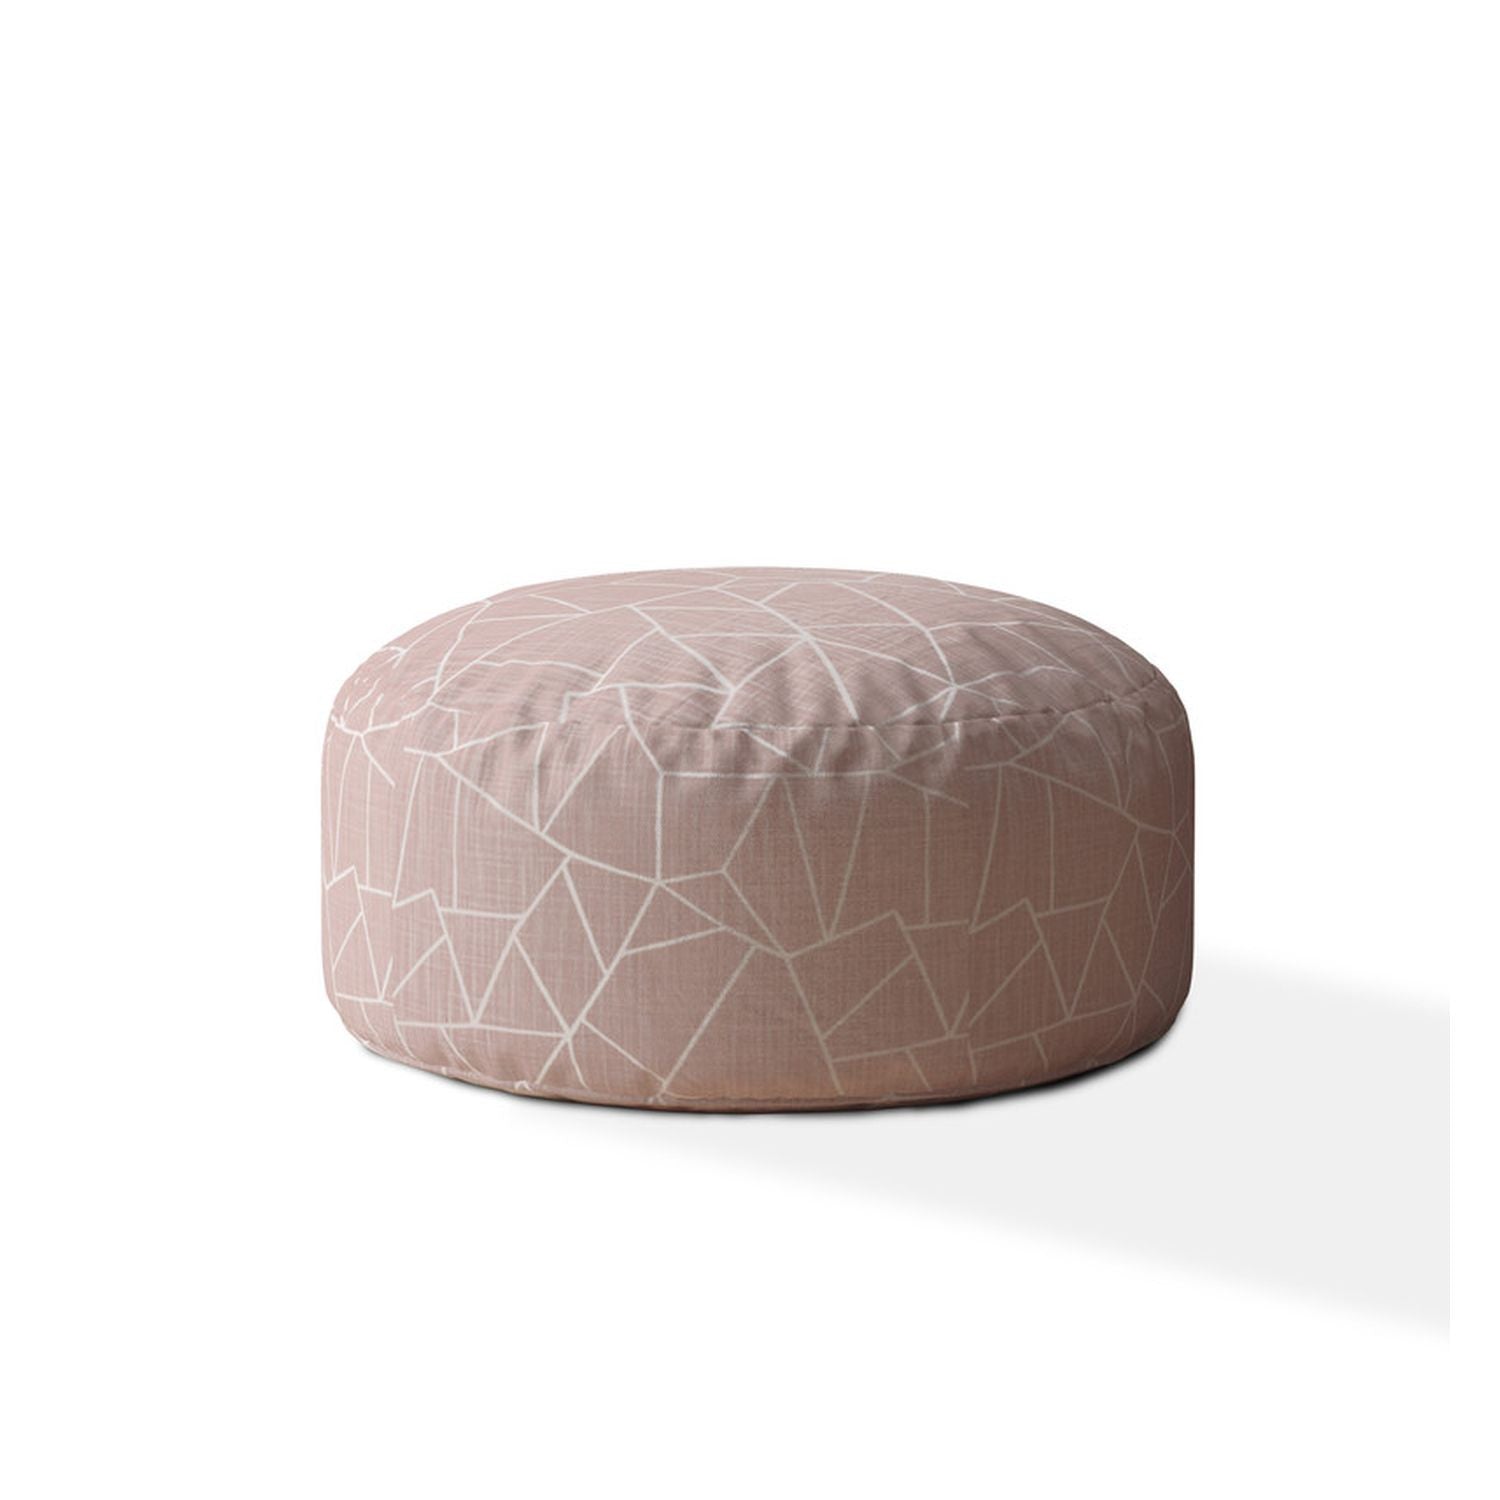 24" Pink Canvas Round Geometric Pouf Cover